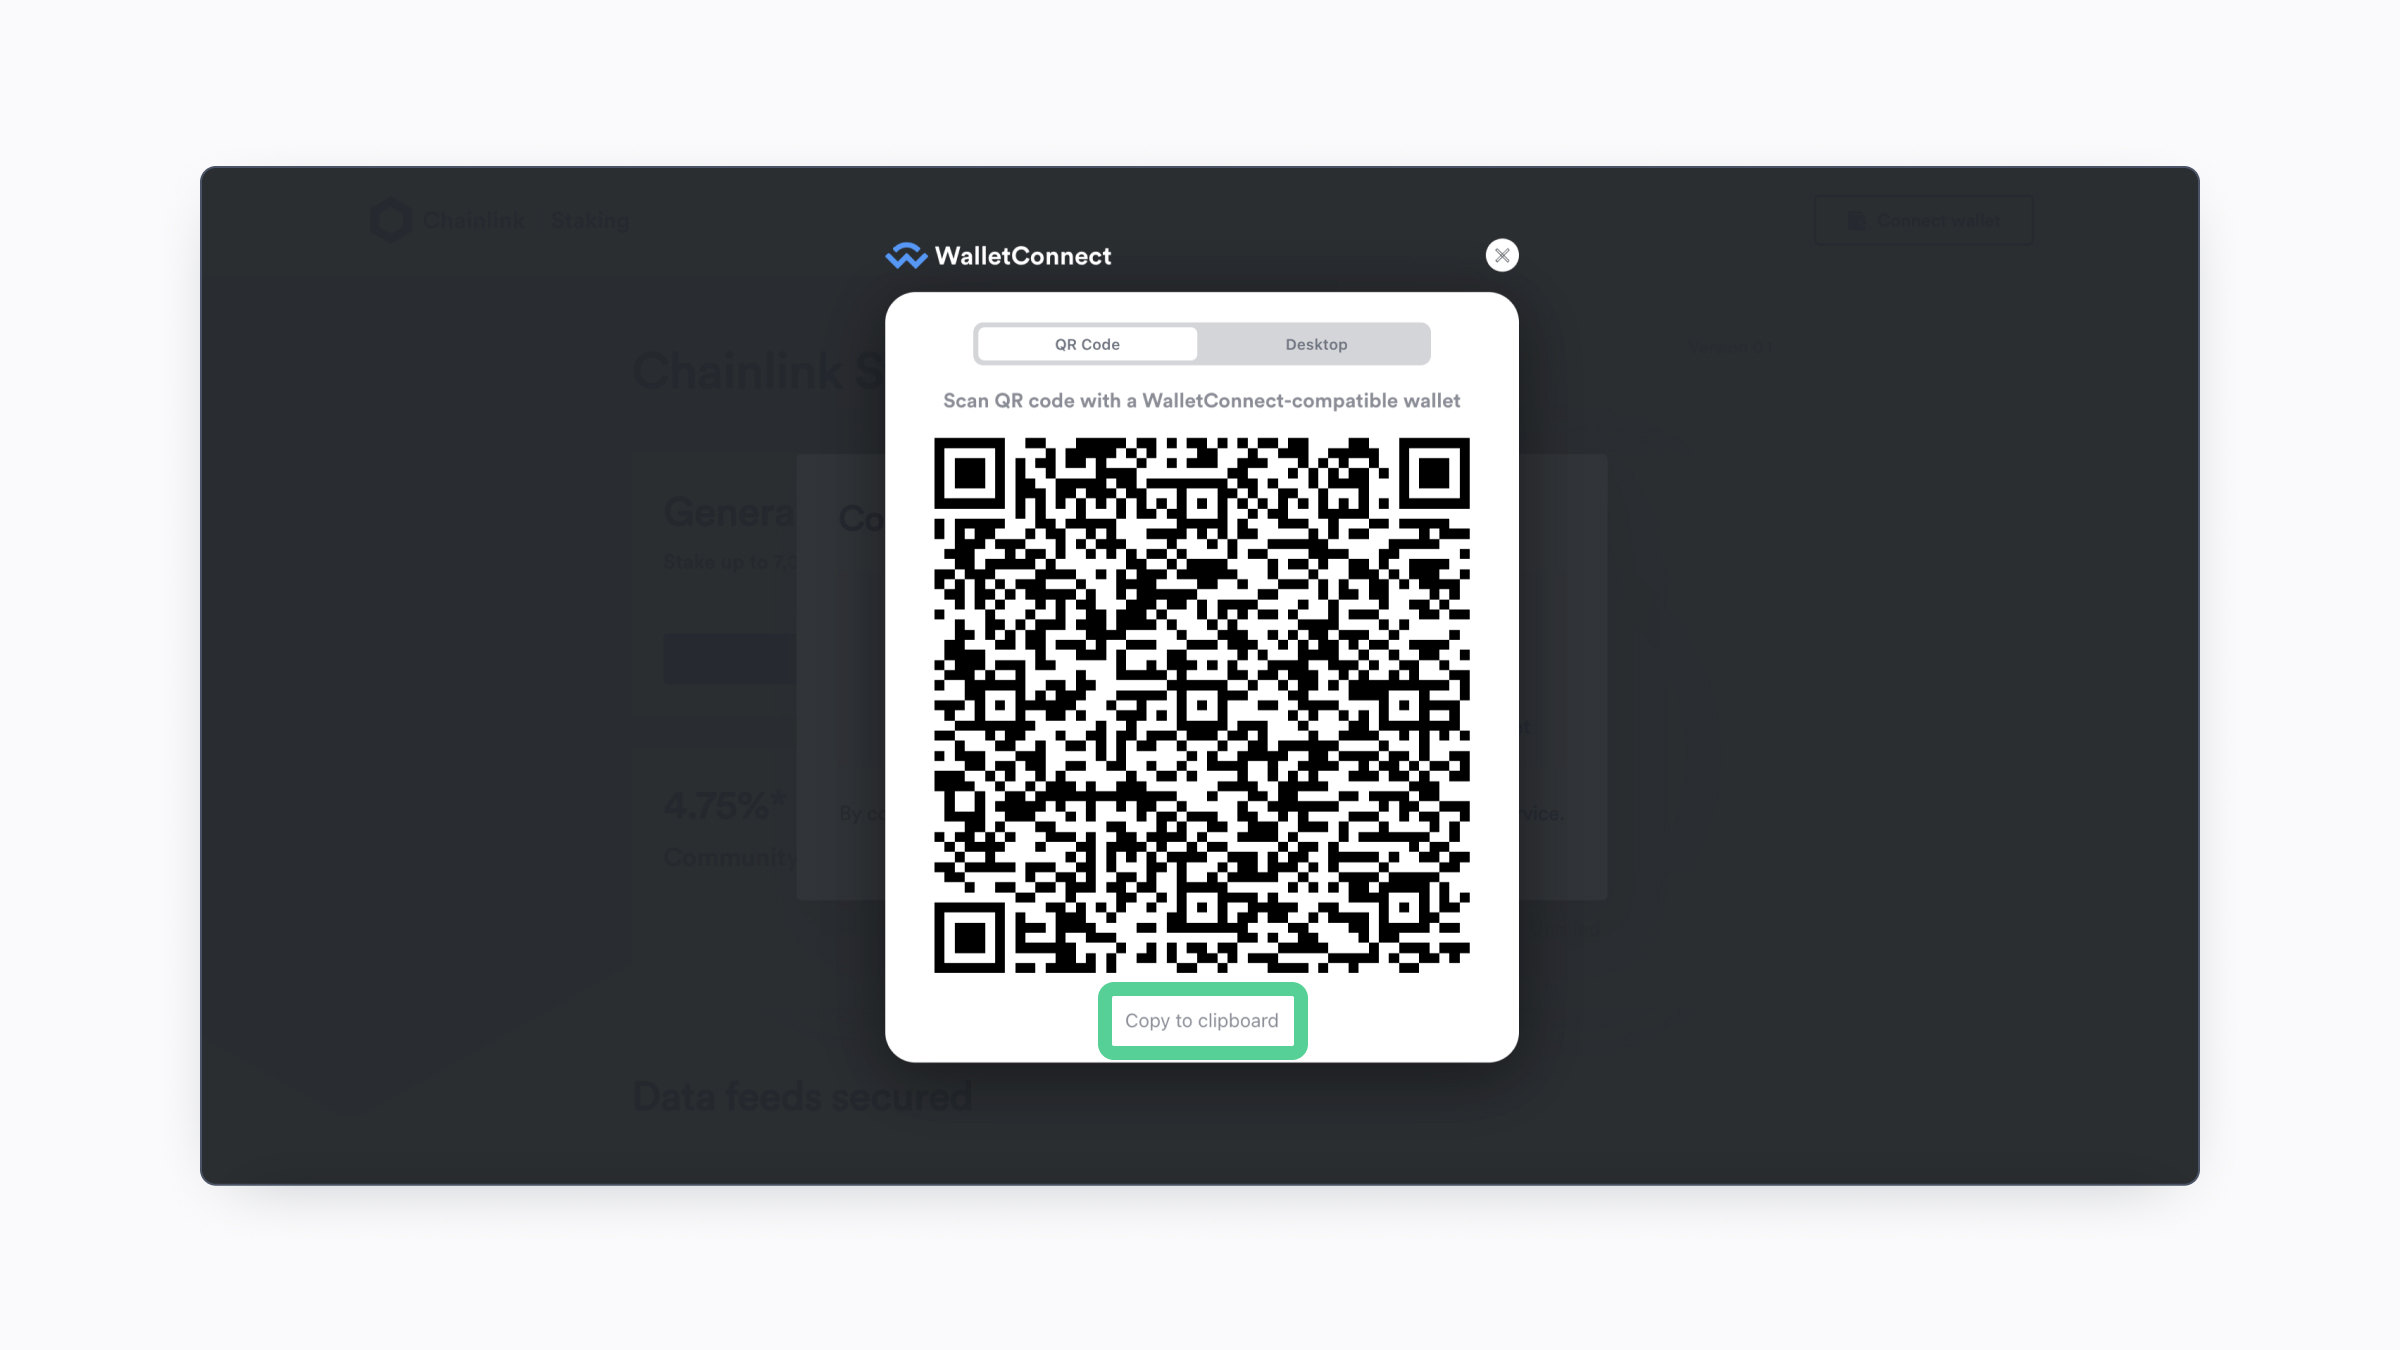 A screenshot of the WalletConnect QR code with "copy to clipboard" highlighted.